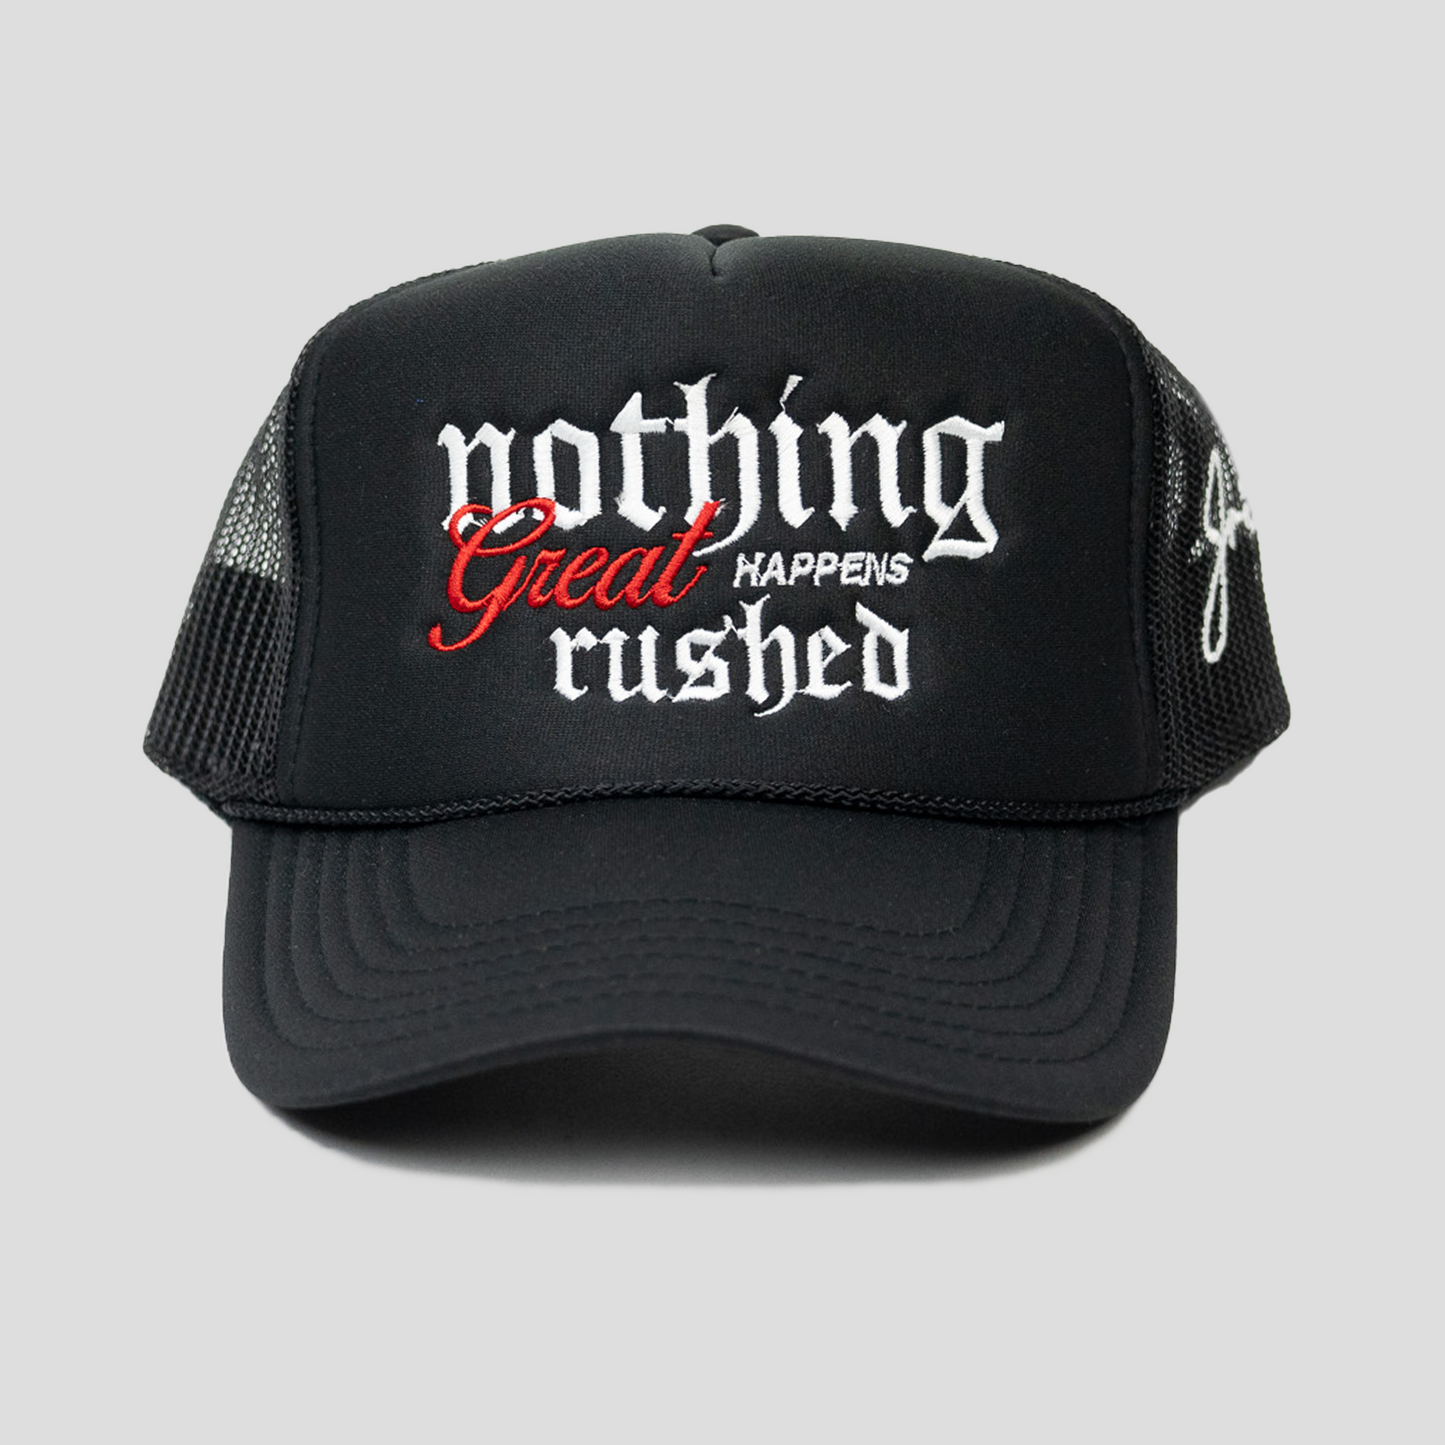 Nothing Great Happens Rushed Trucker Hat (BLACK)